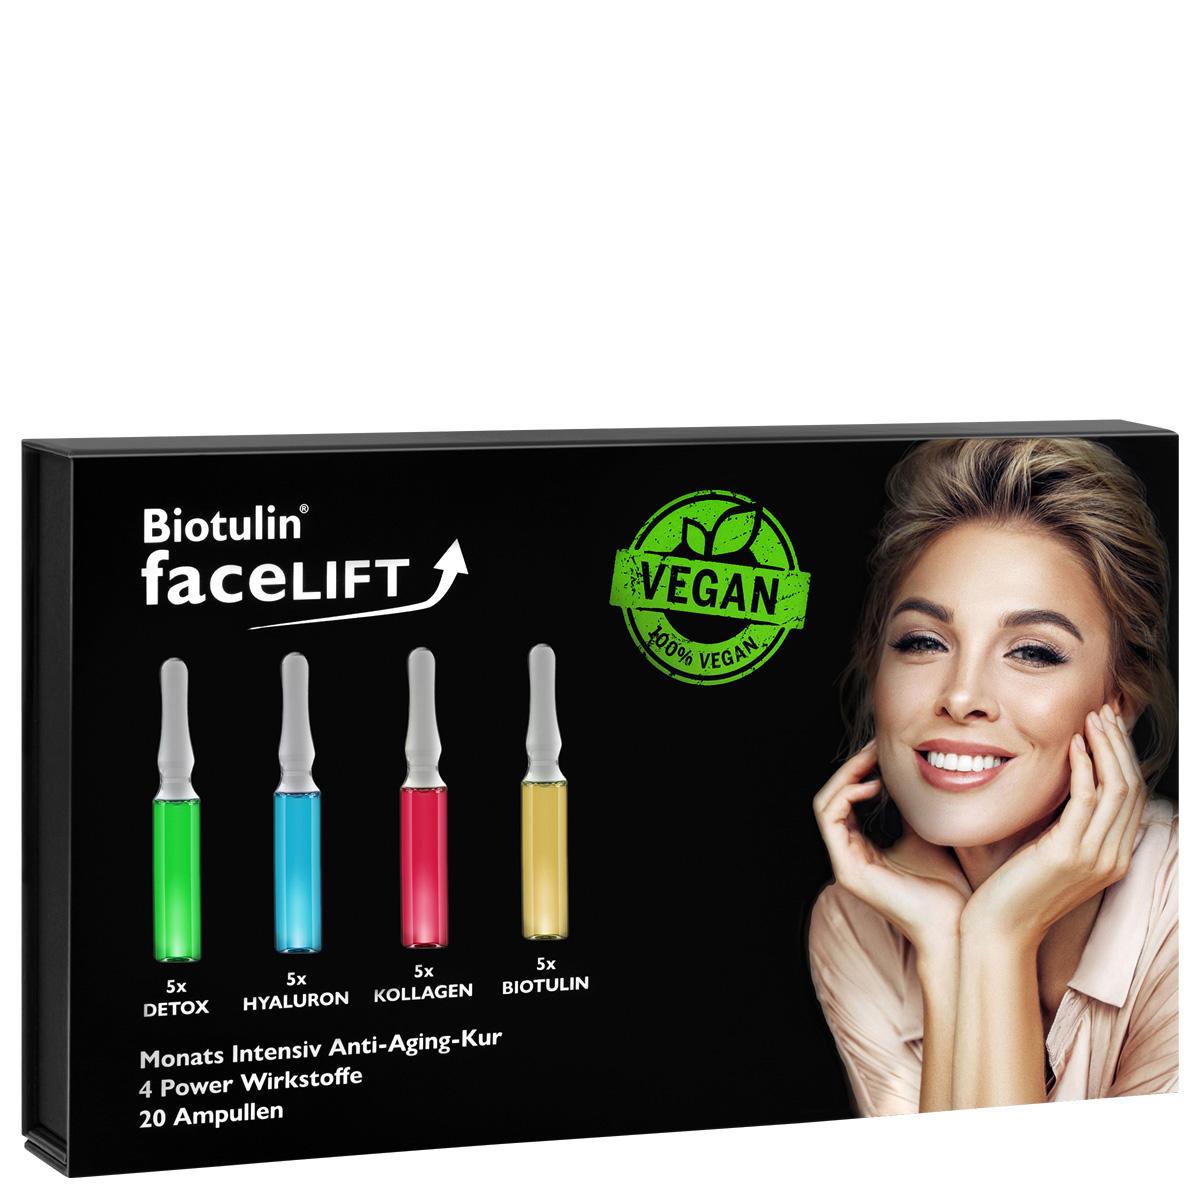 Biotulin faceLIFT intensive monthly cure 20 x 1 ml - 1